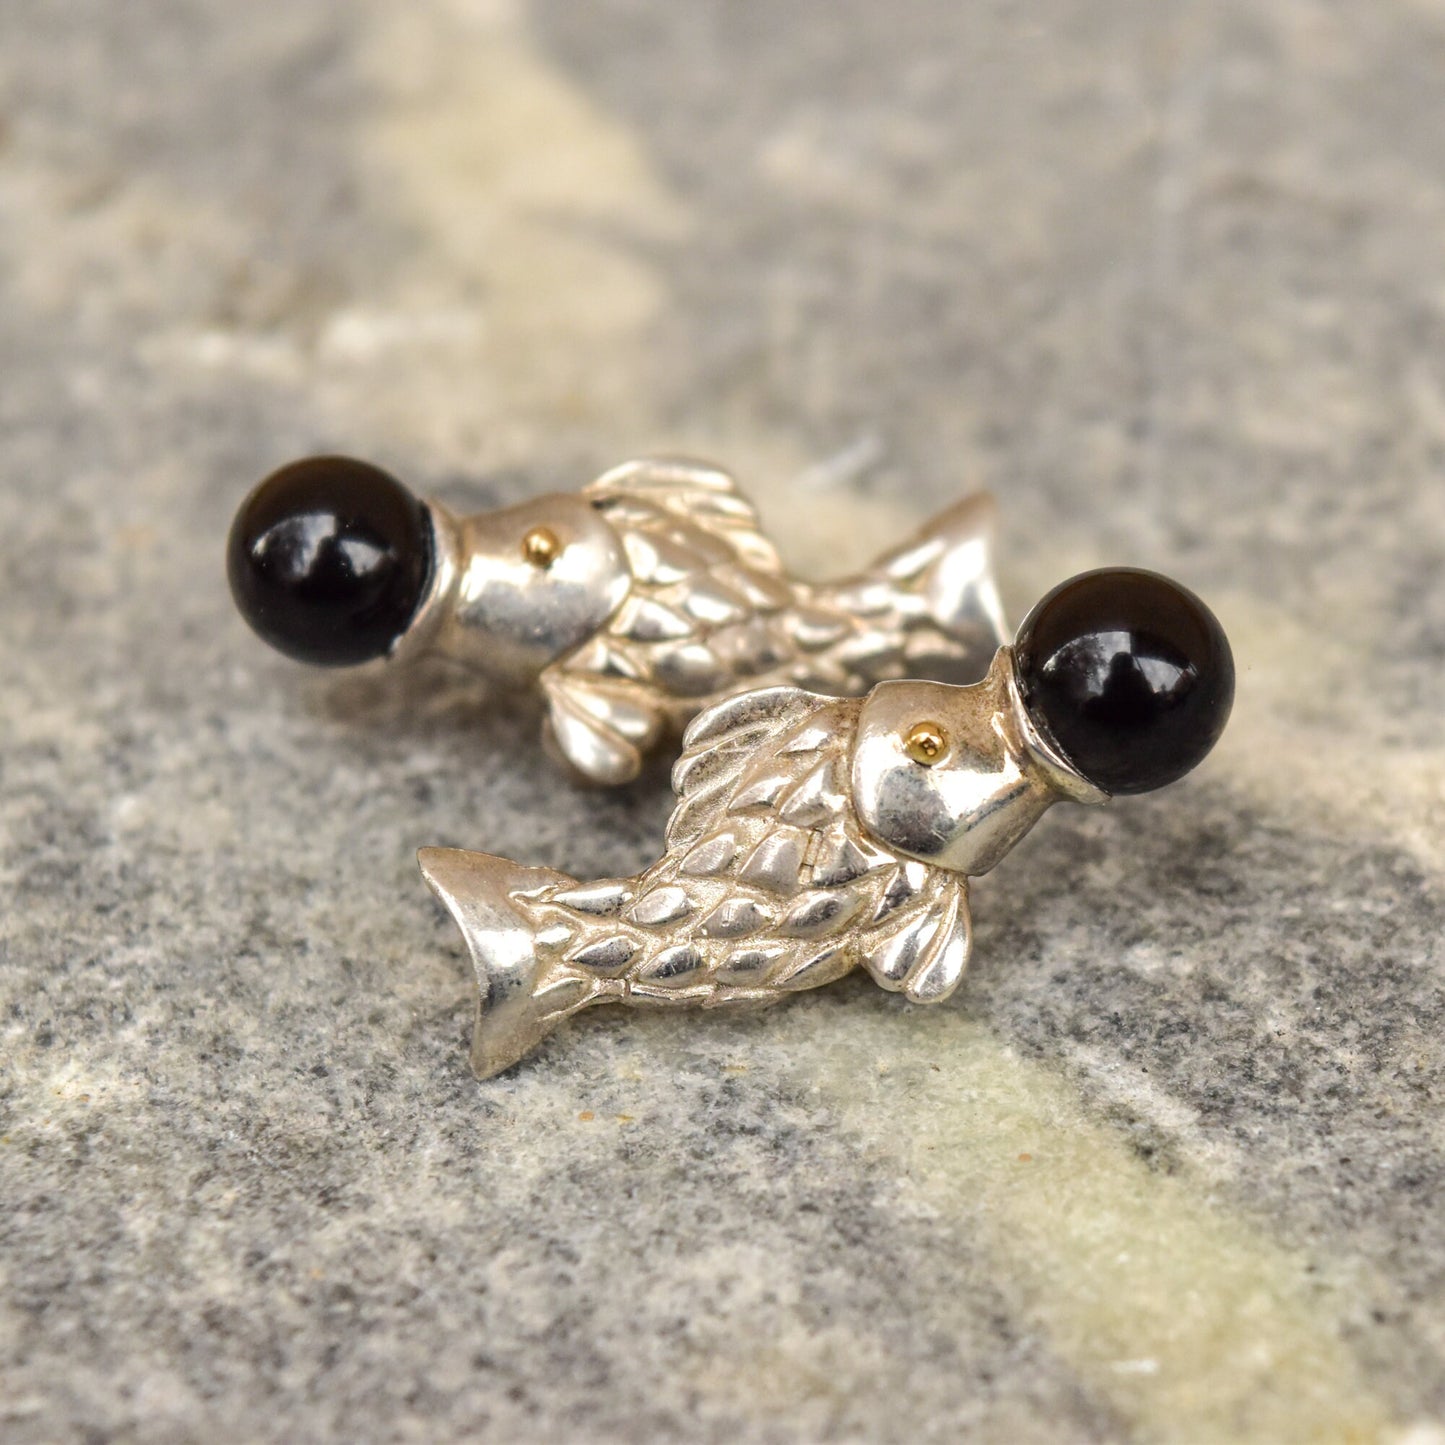 Tiffany & Co. Sterling Silver Onyx Ball Fish Stud Earrings, 18K Gold Accents, Vintage Designer Jewelry, 1 1/4"